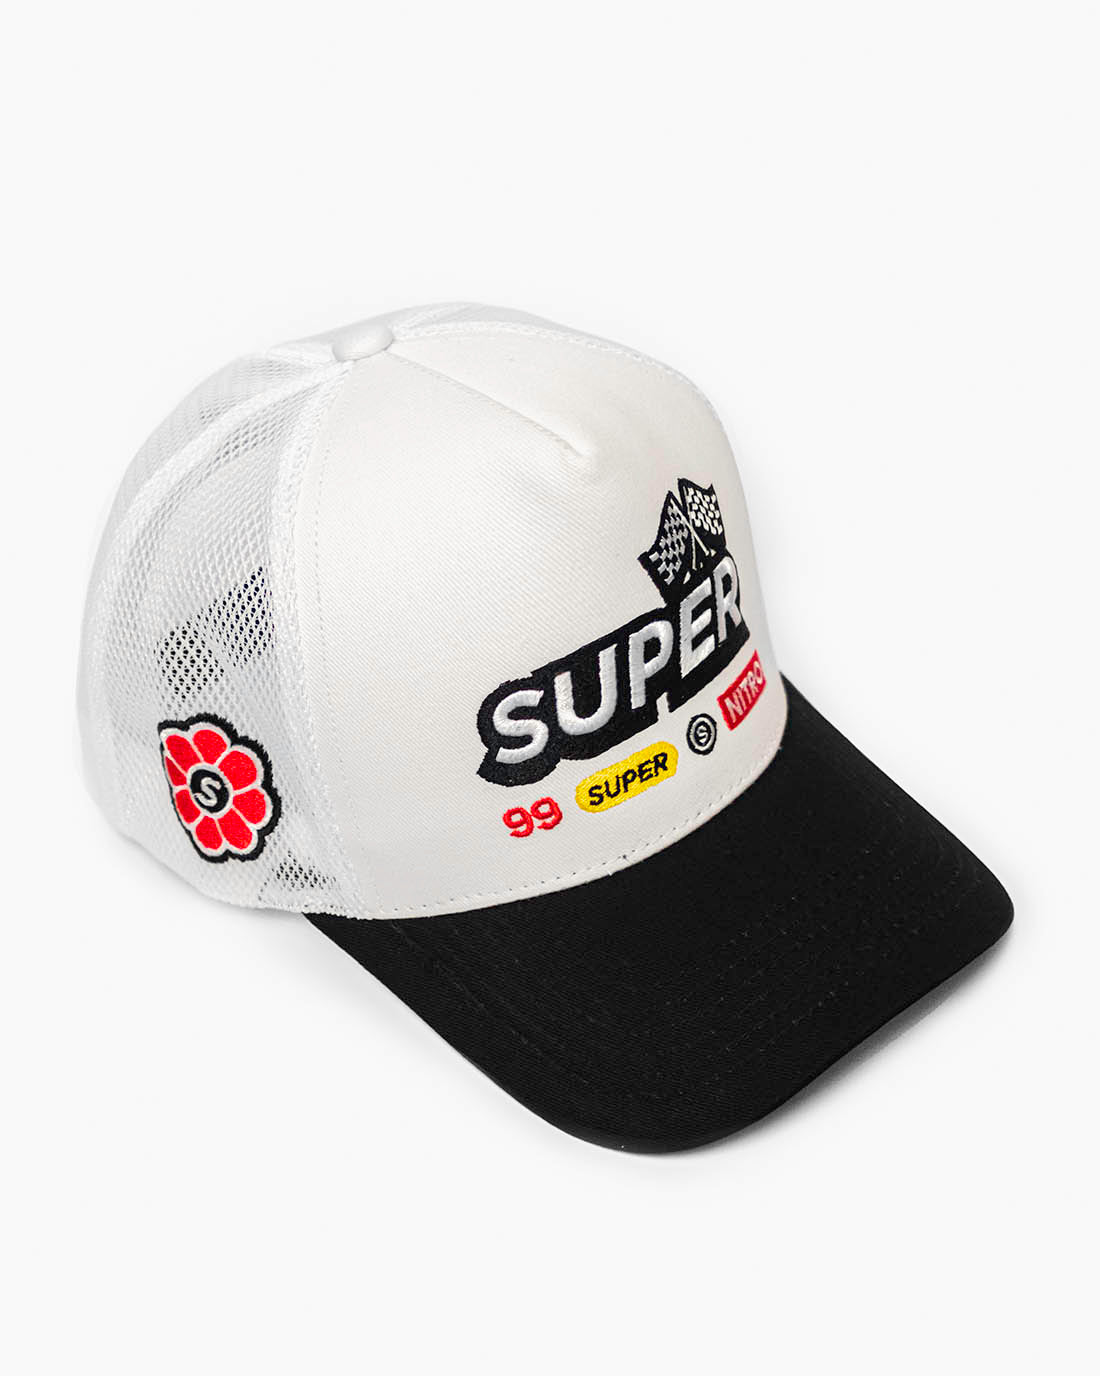 Front side view of a two-tone black and white snapback hat with colorful racing-inspired embroidered design and cooling mesh back.